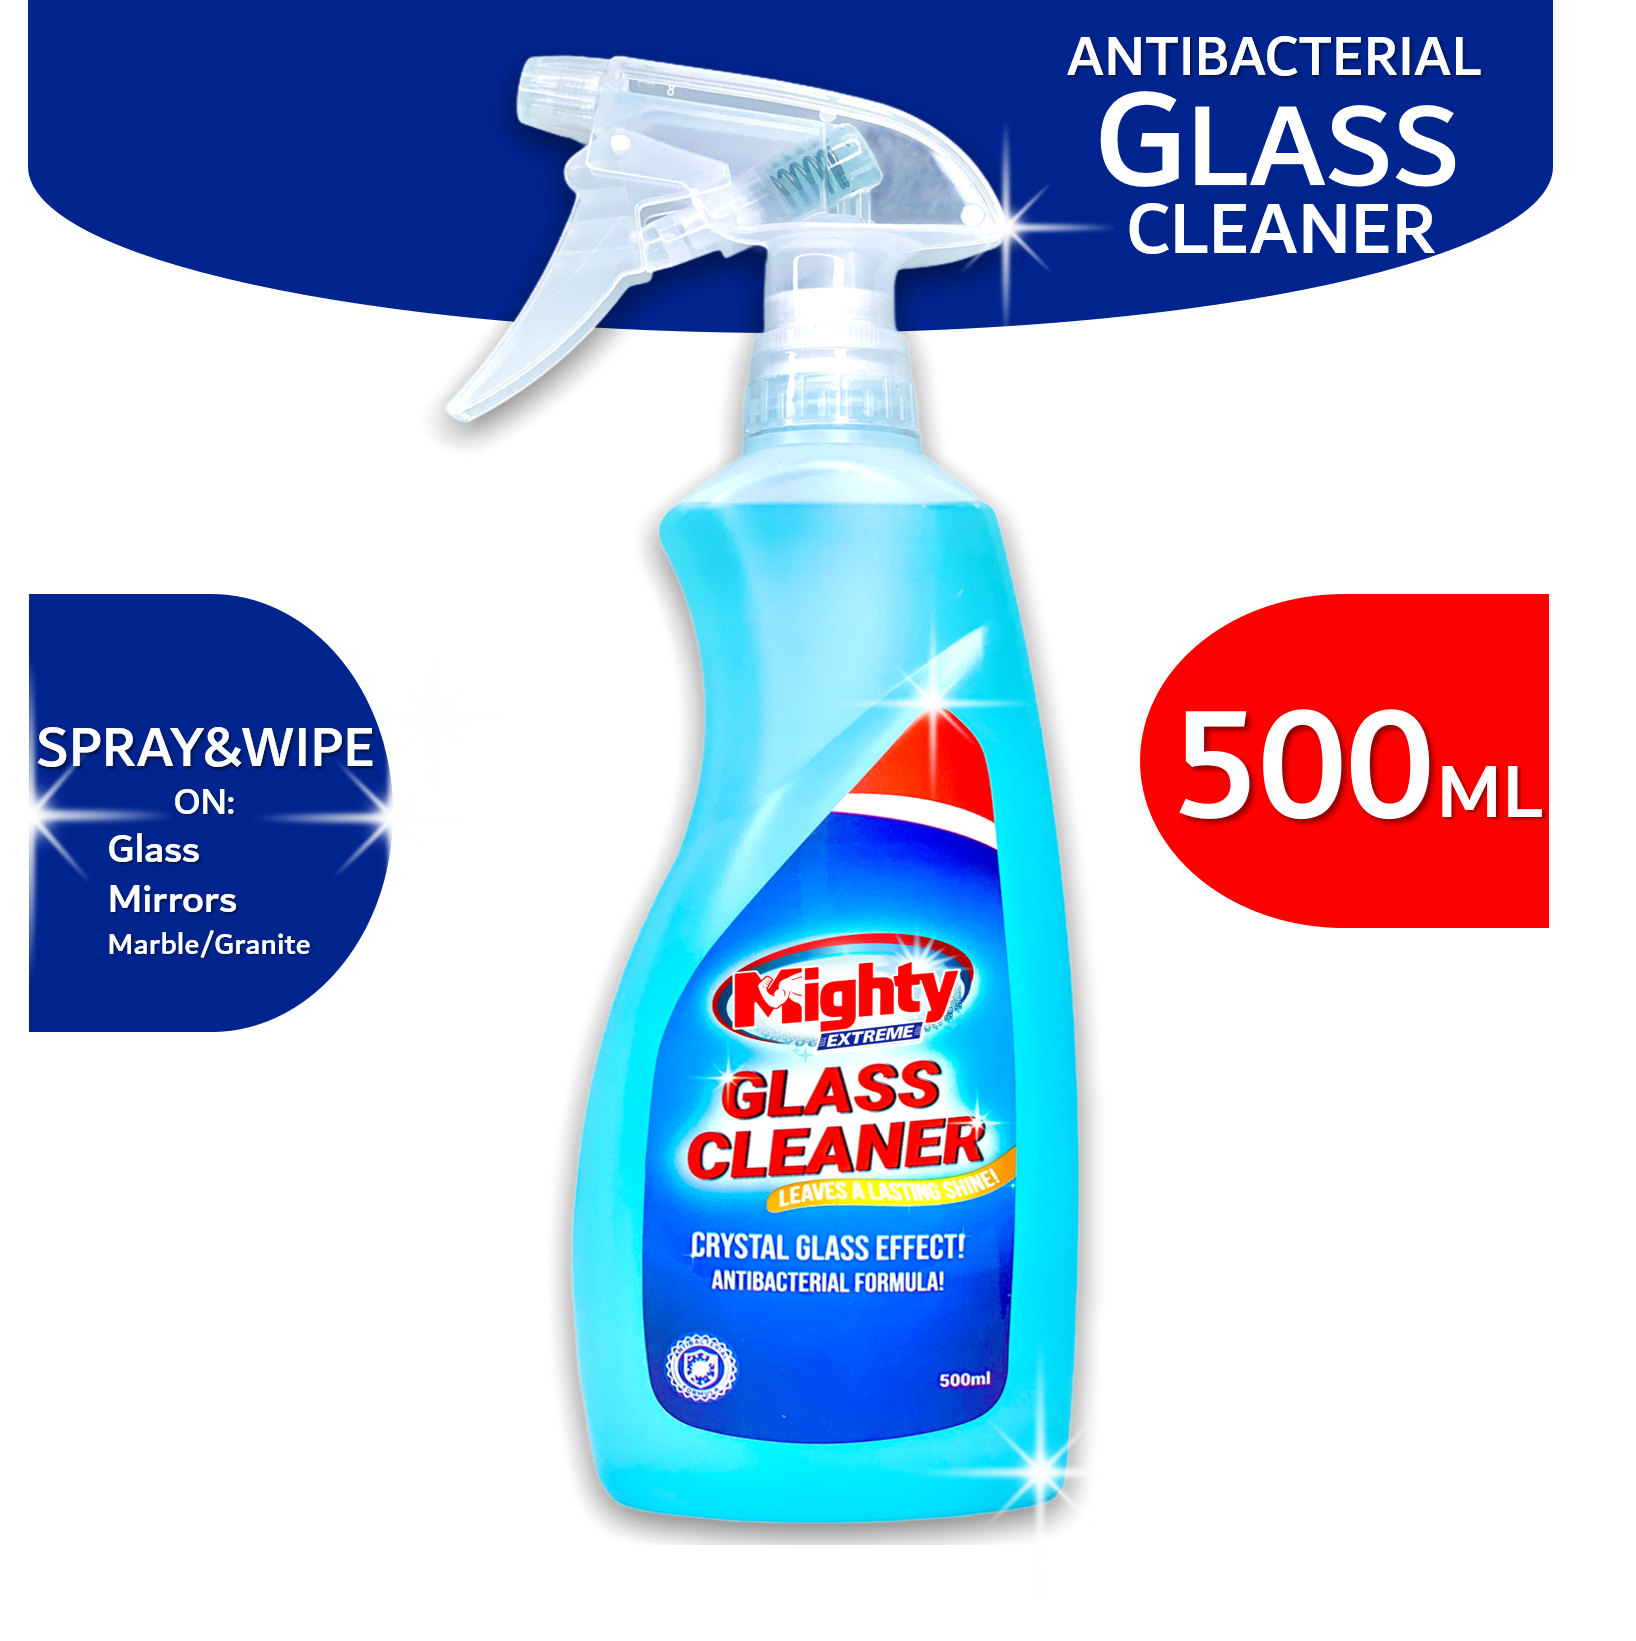 Mighty Glass Cleaner Antibacterial 500ml with SPRAY - GLASS